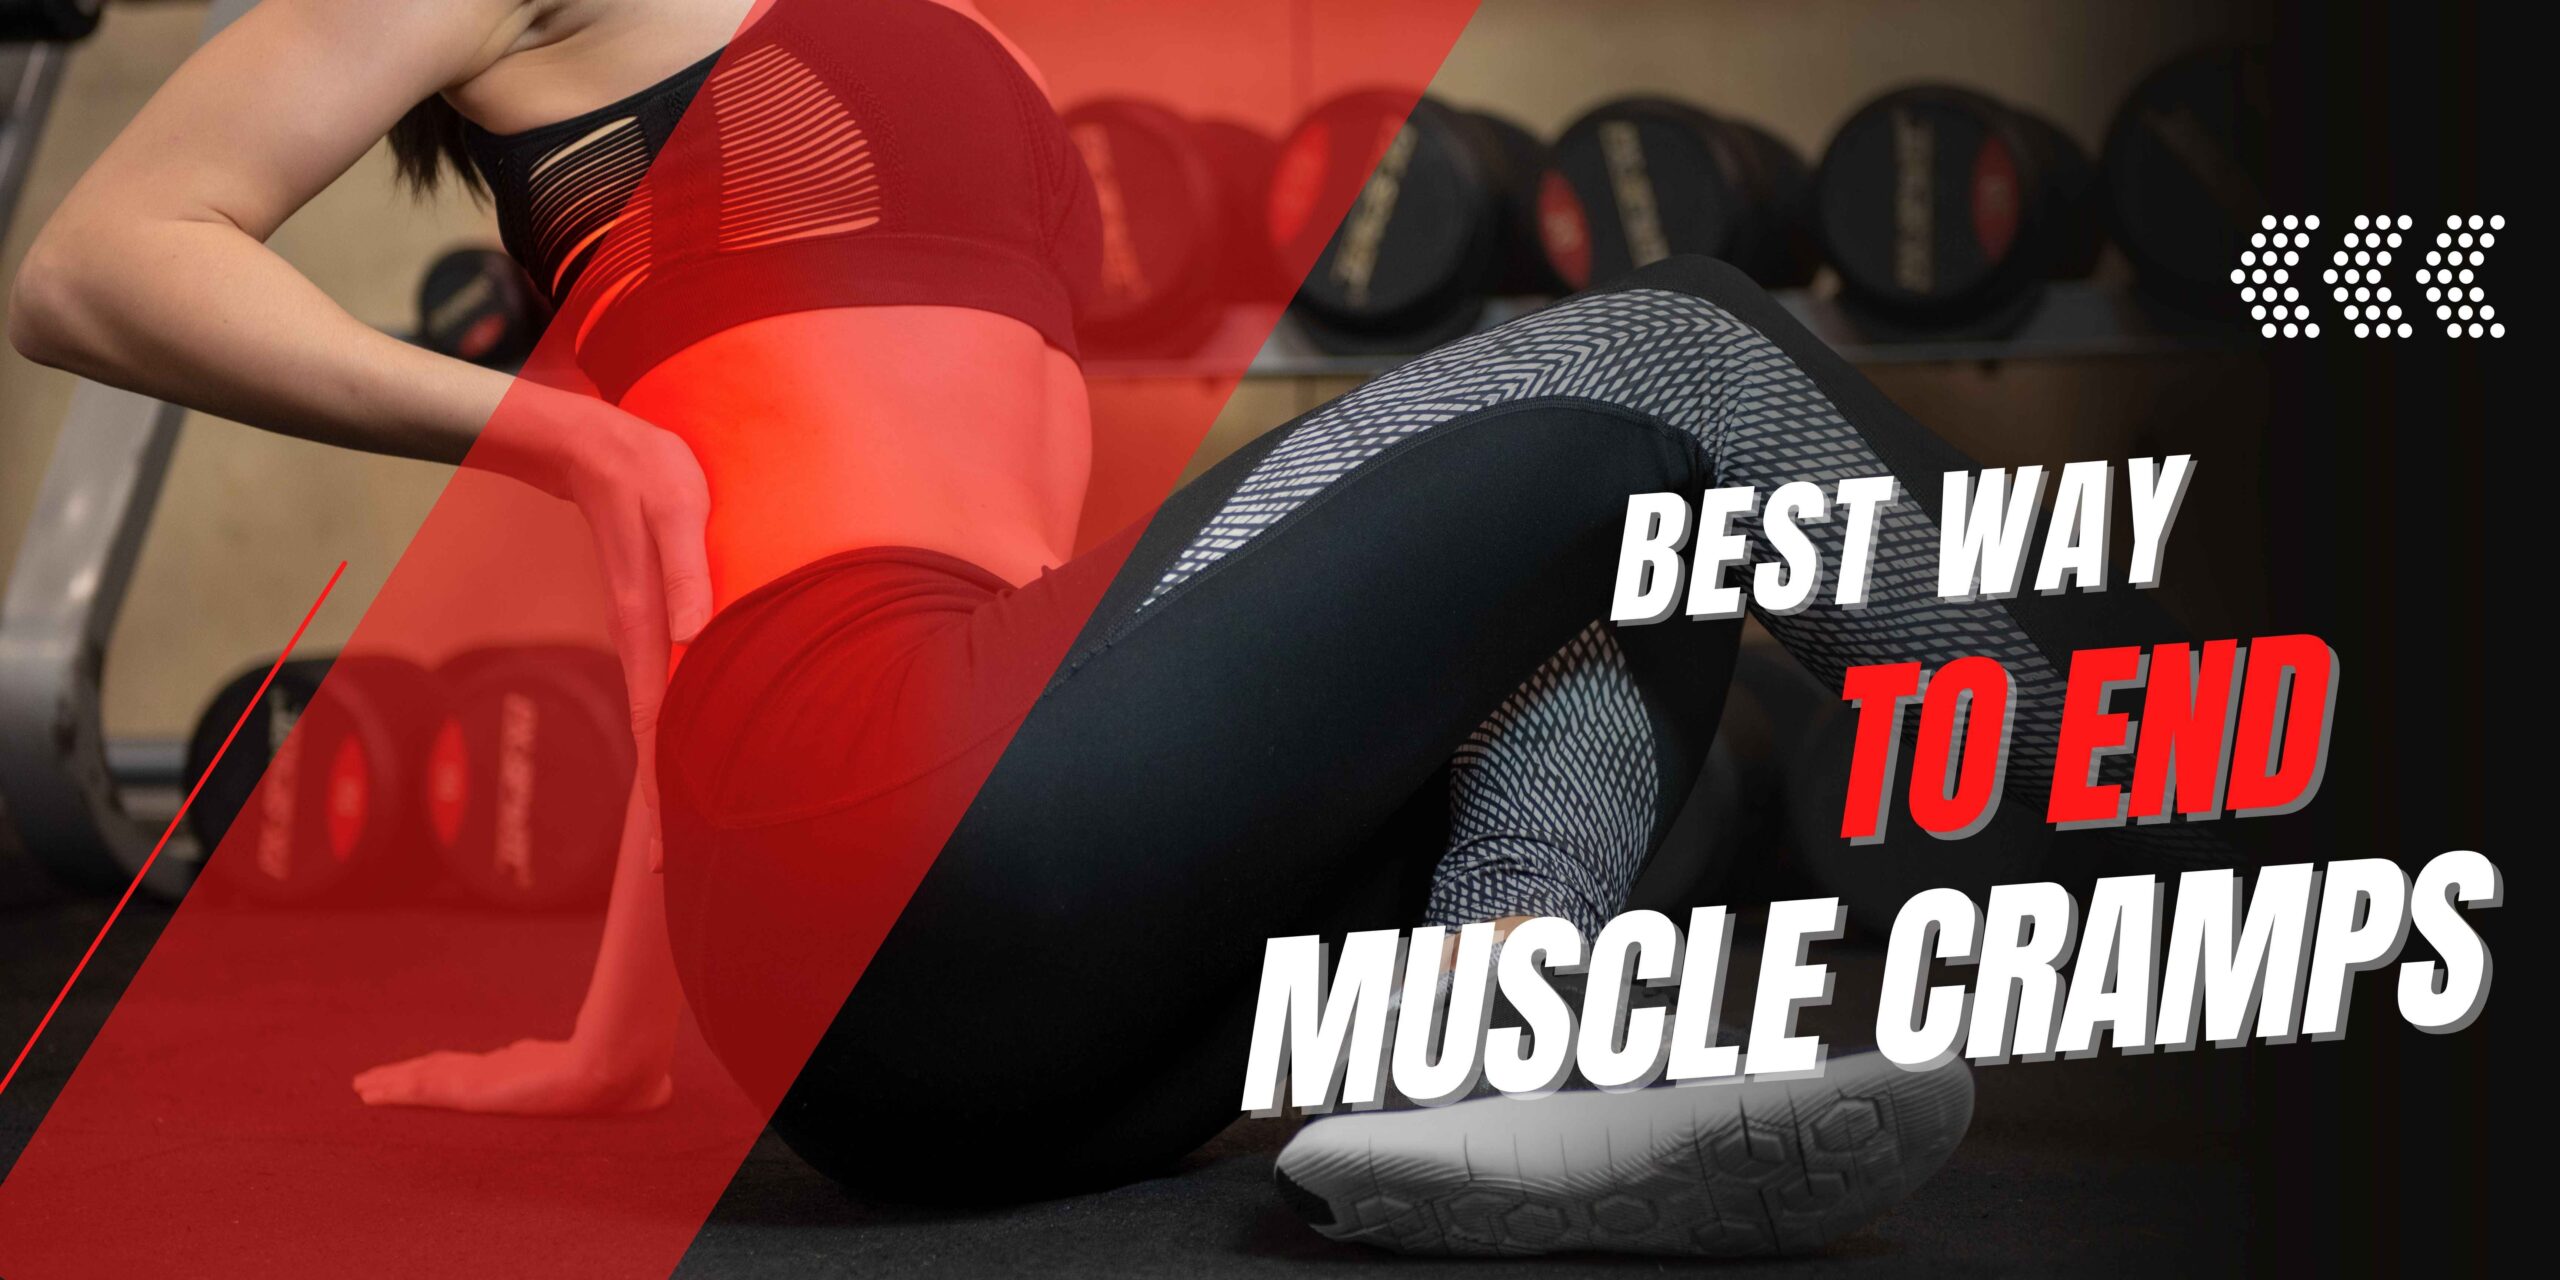 Best Ways to End Muscle Cramps